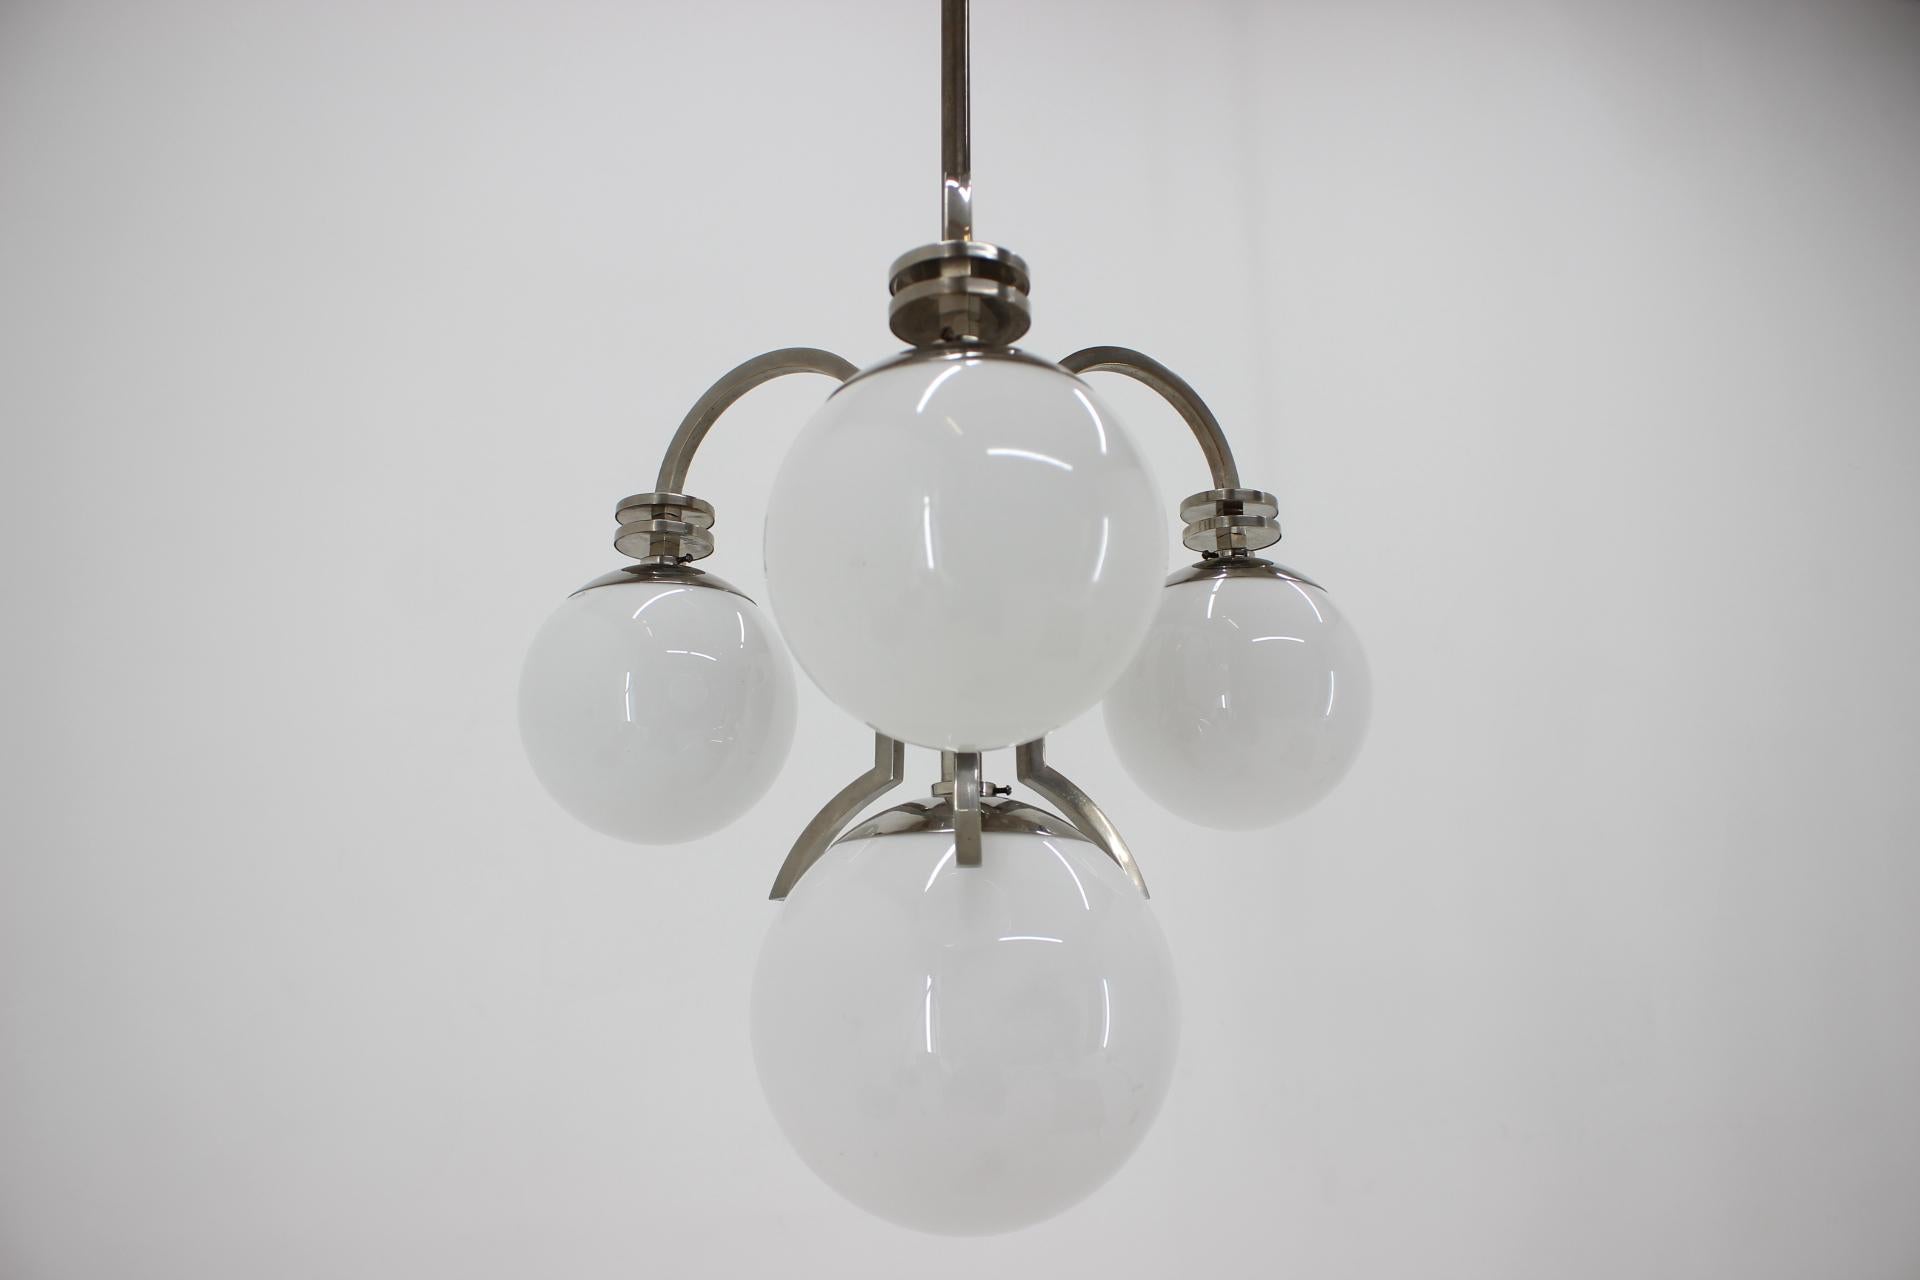 Big Chrome Bauhaus / Functionalism Chandelier / Pendant, 1930s In Good Condition For Sale In Praha, CZ